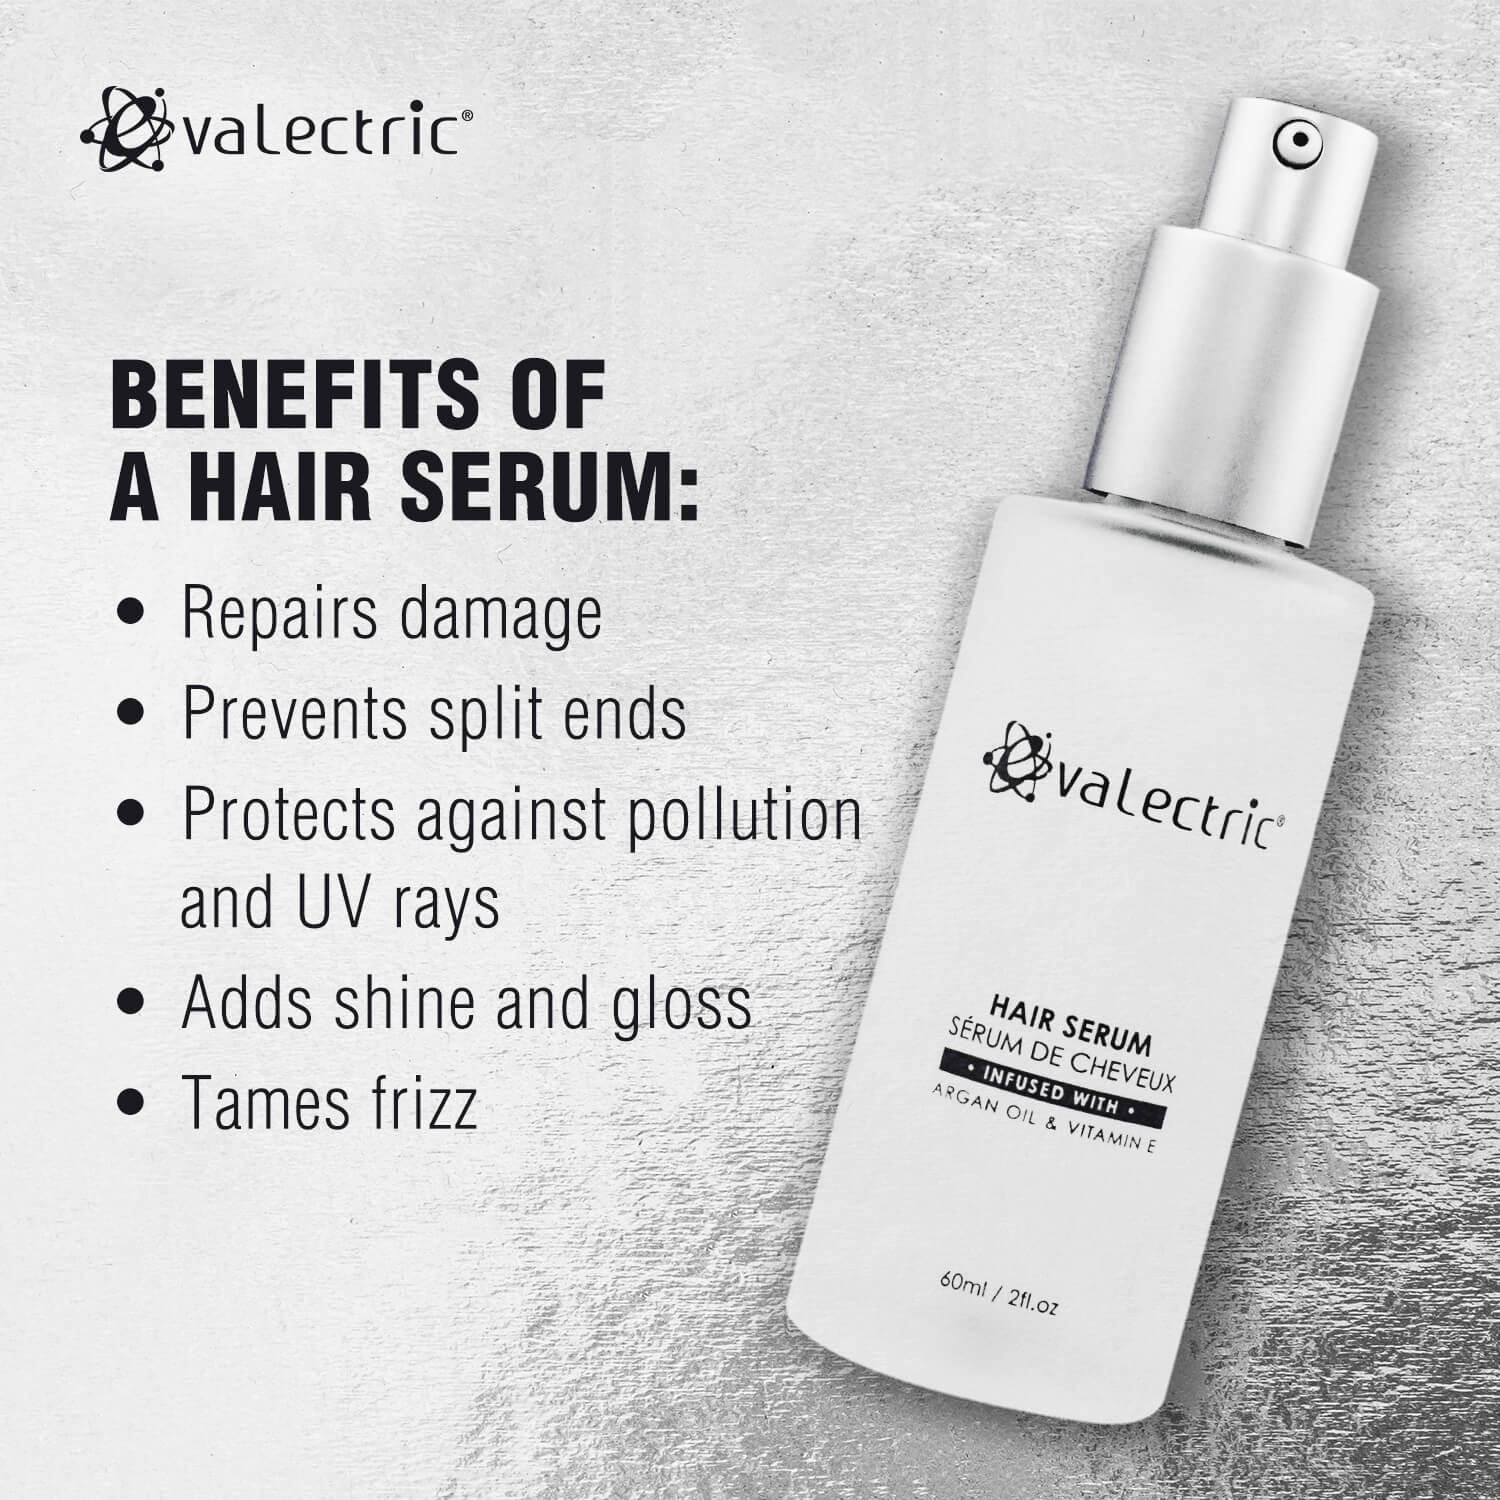 What are the pros and cons of applying hair serum? - Quora